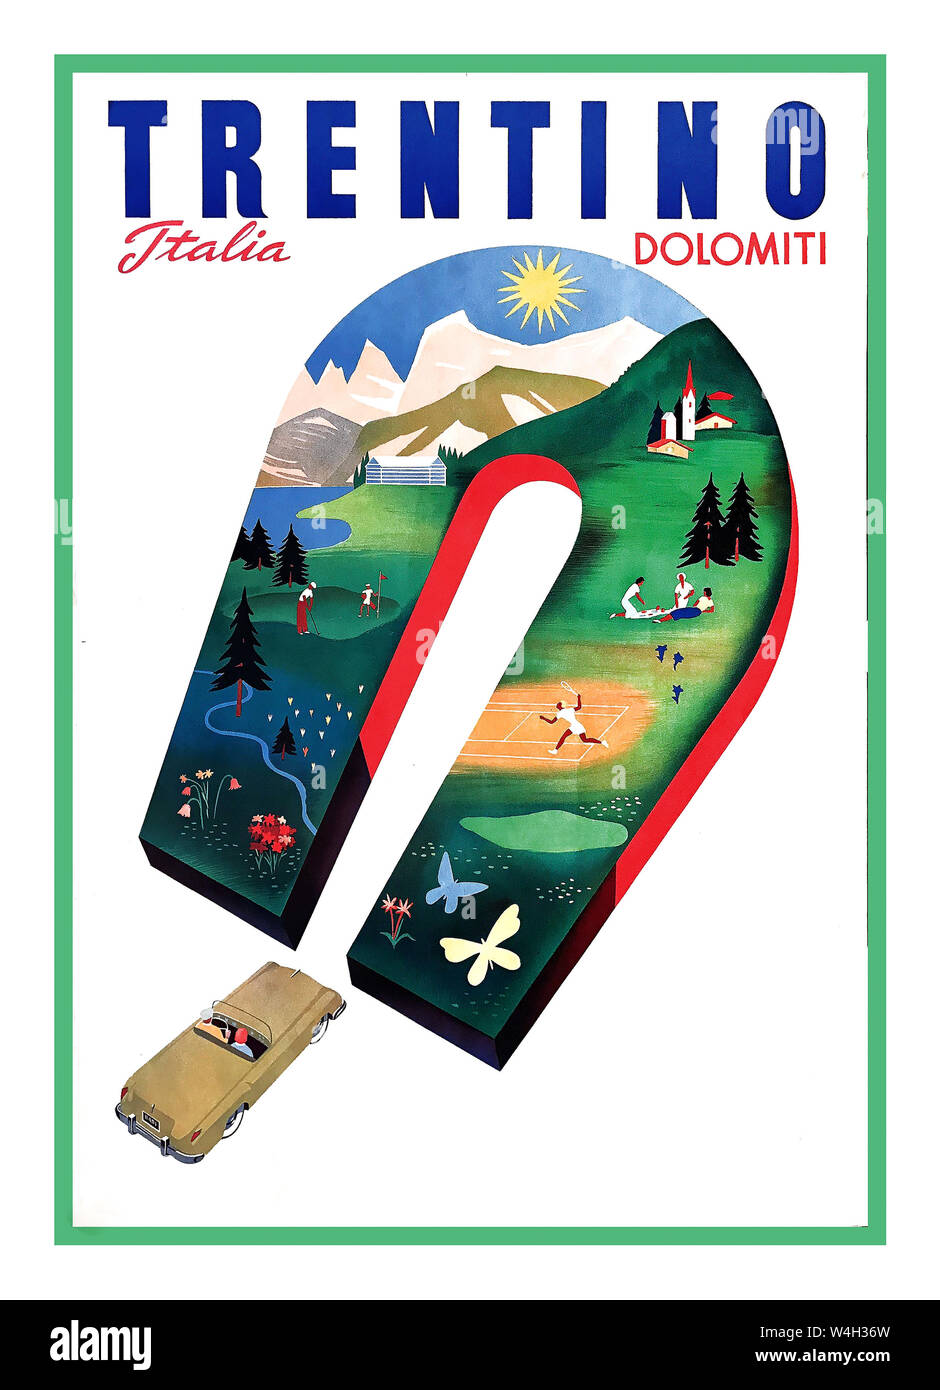 Vintage 1950's Travel Poster Dolomites Italy TRENTINO lithographic poster, 1951. Graphic composition by Puppo, with a Dolomites landscape scene inserted in a magnet horseshoe shape design Mario Puppo (1913-1989) Stock Photo